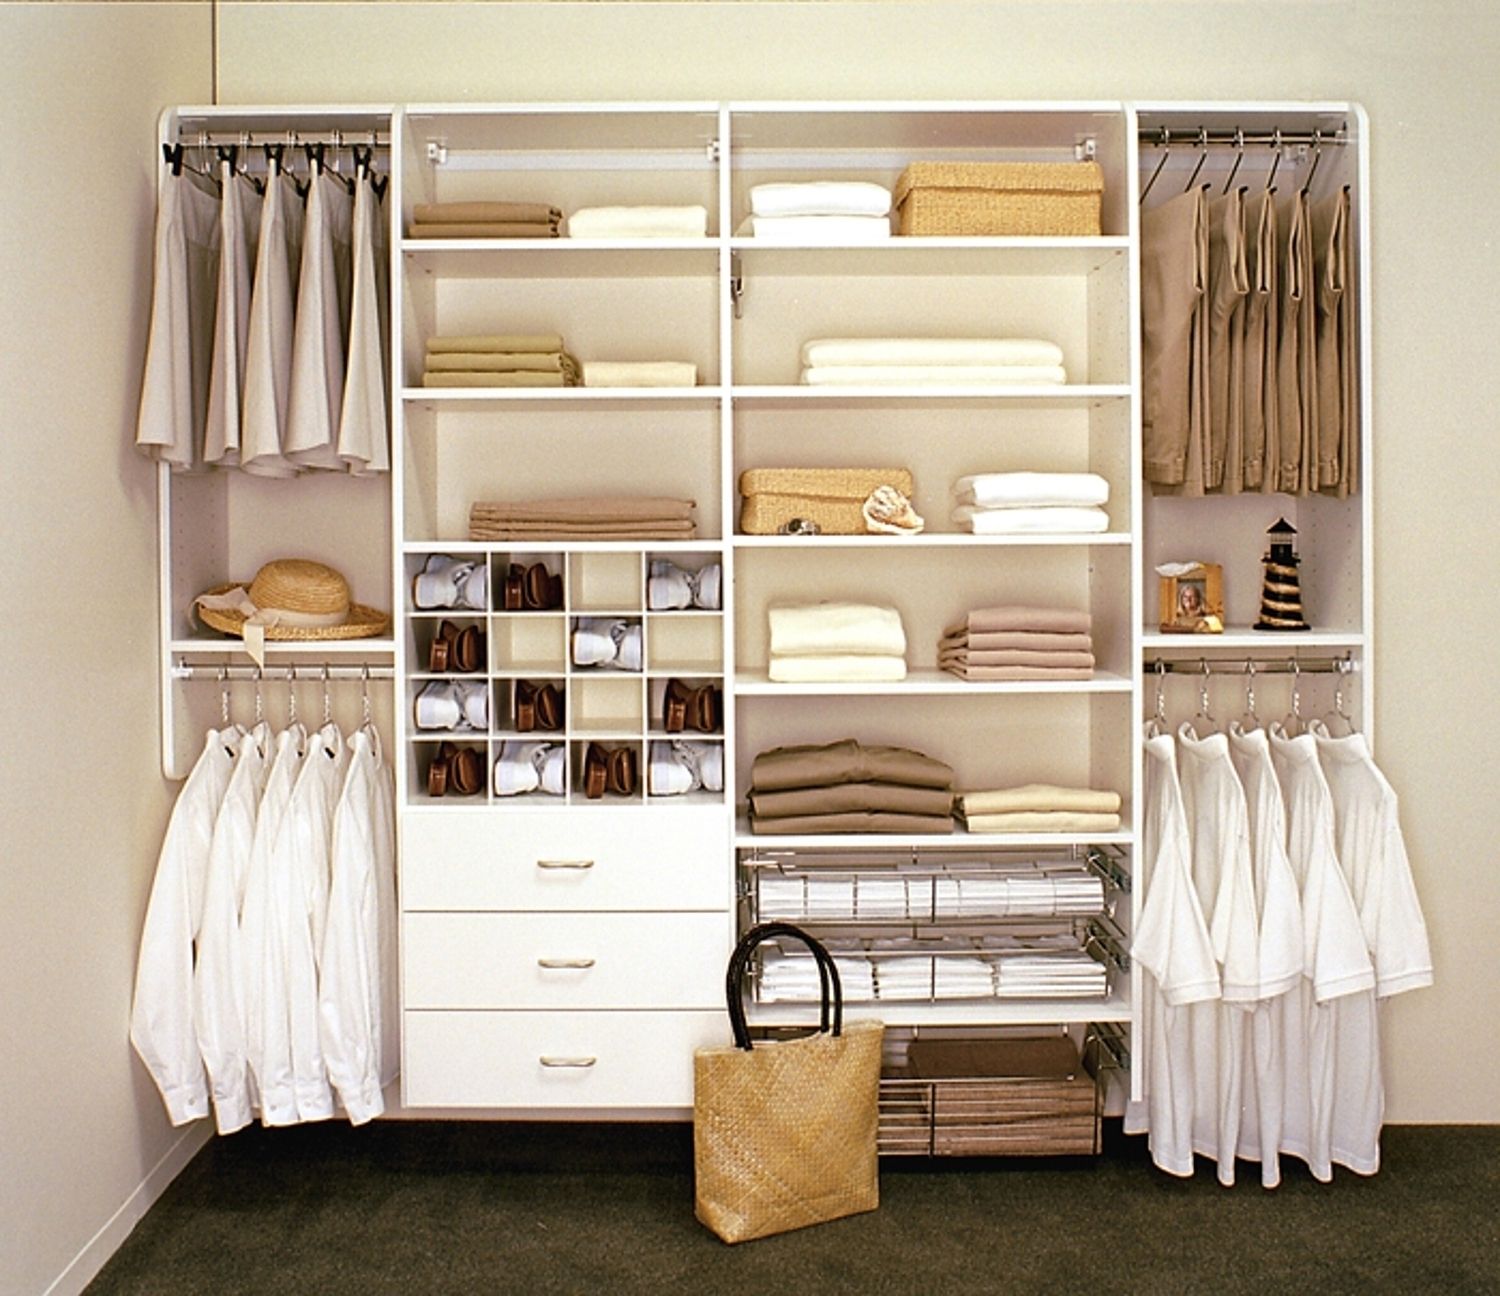 Most Recently Released Bedroom Wardrobes Storages Intended For Closet Storage : Modern Wadrobe Bedroom Storage Cabinets Wall (View 11 of 15)